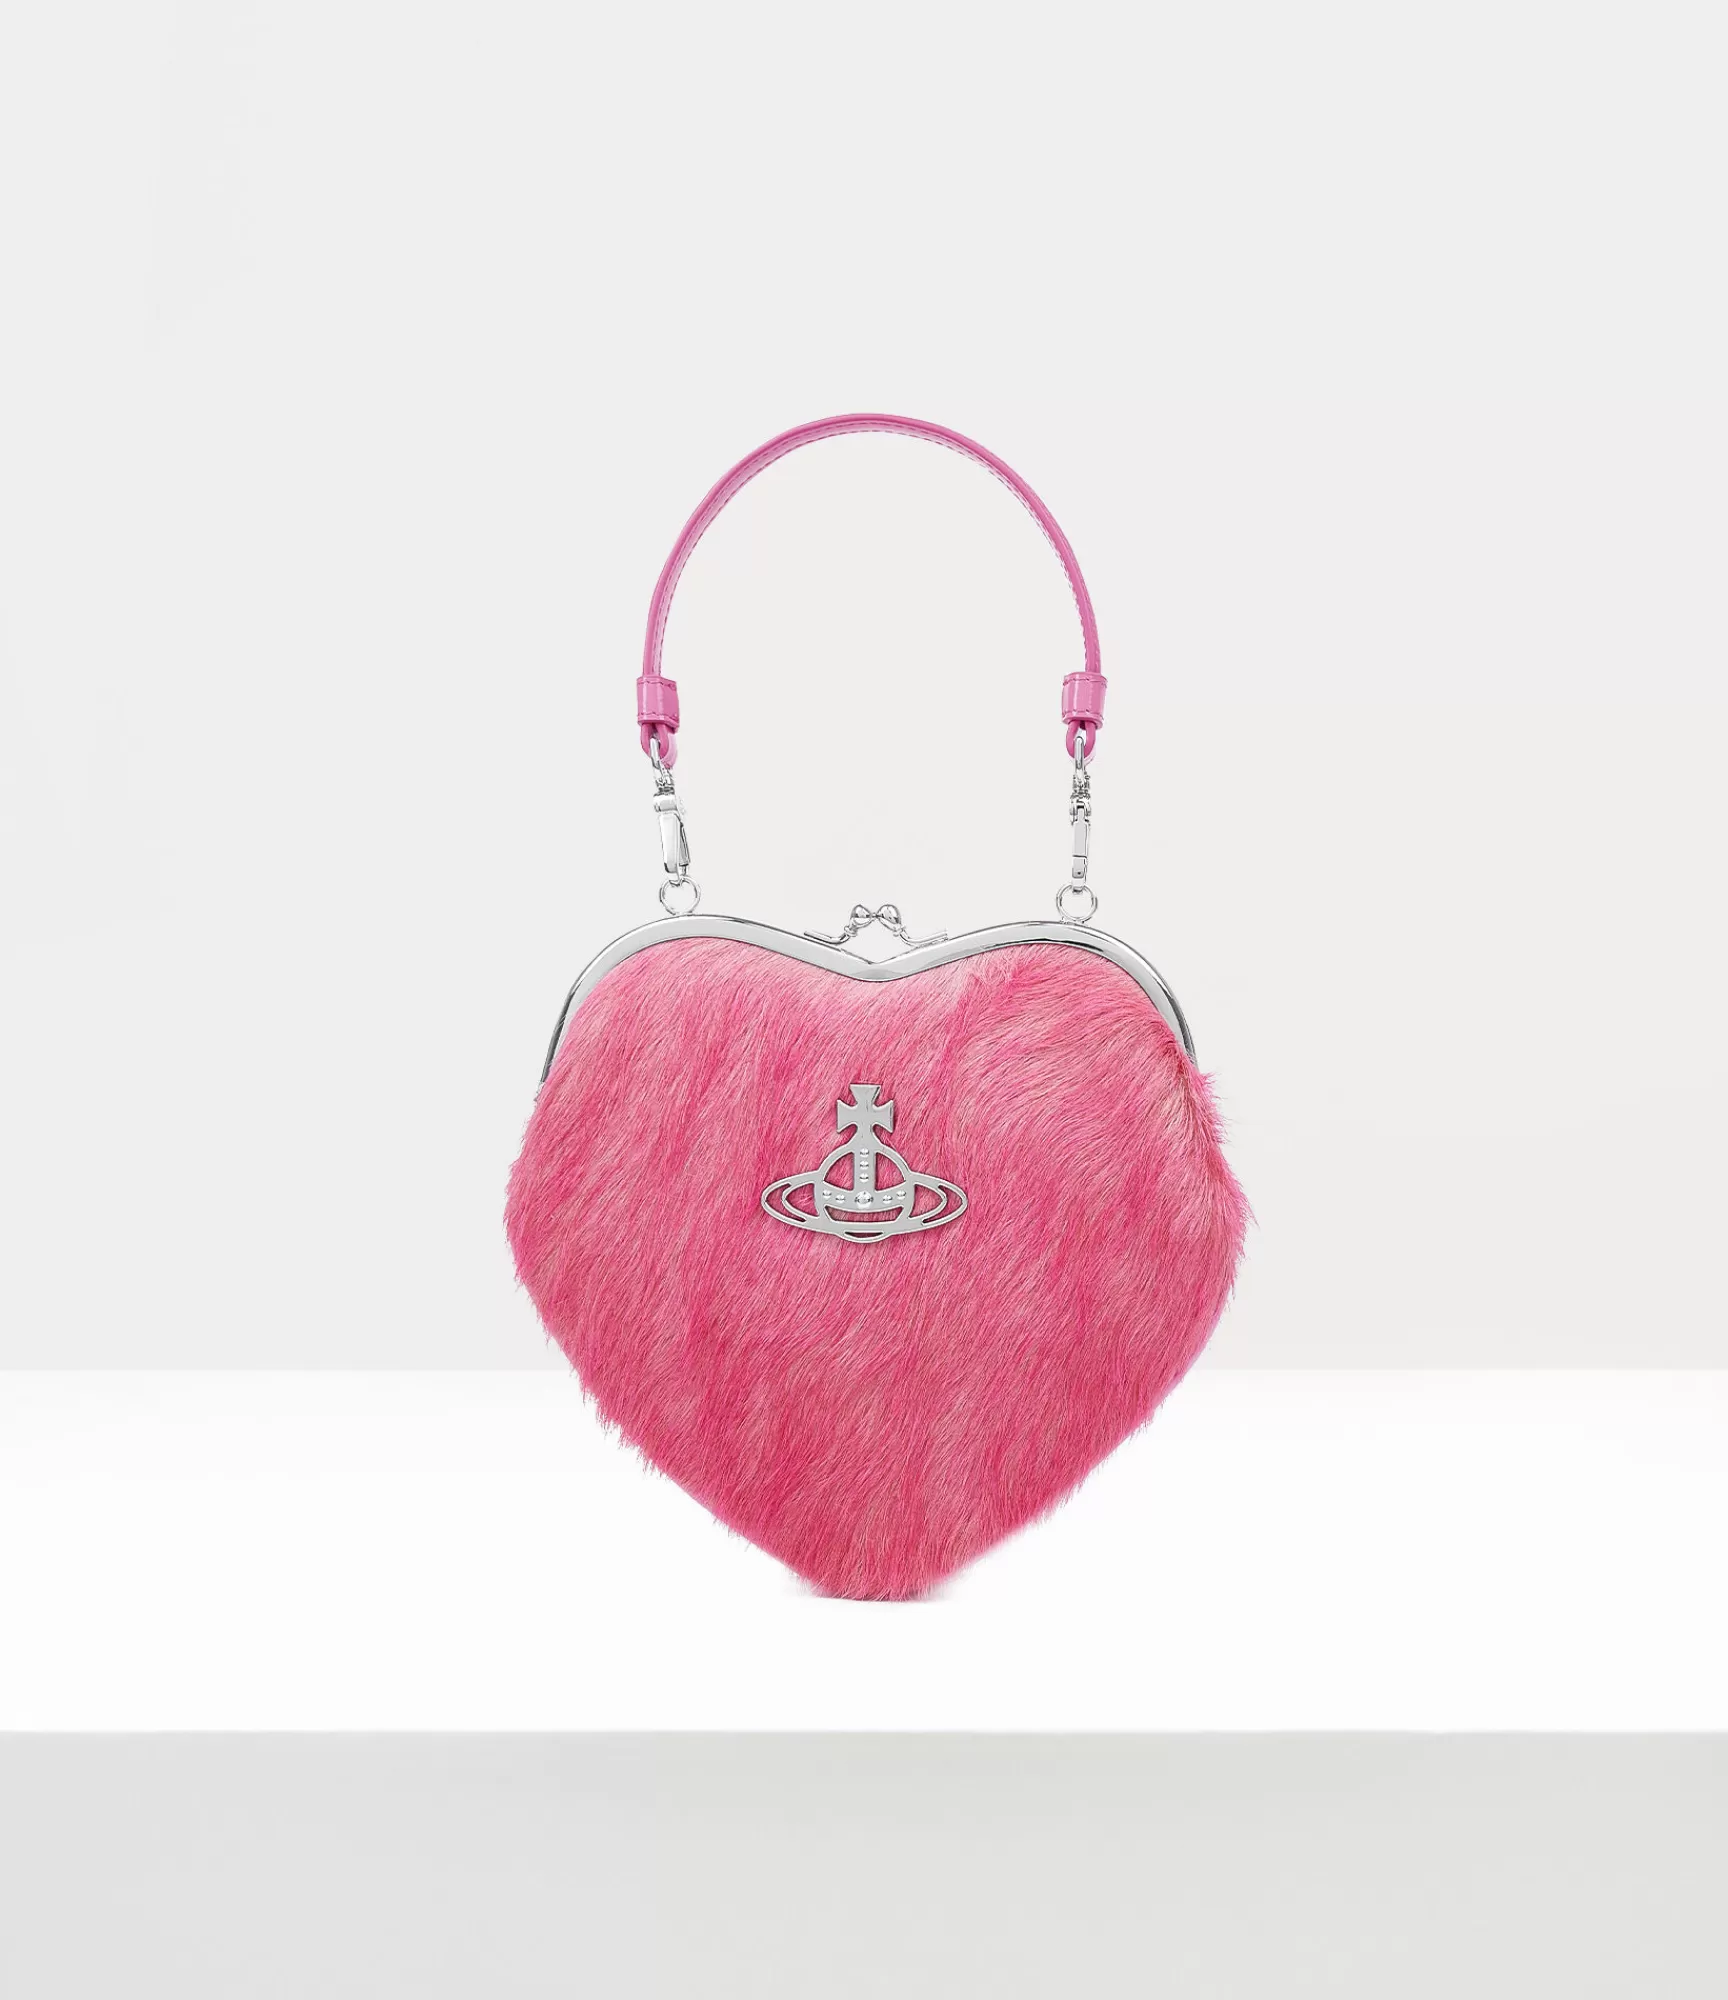 Vivienne Westwood Wallets and Purses | Handbags | Clutches*Heart frame purse Pink